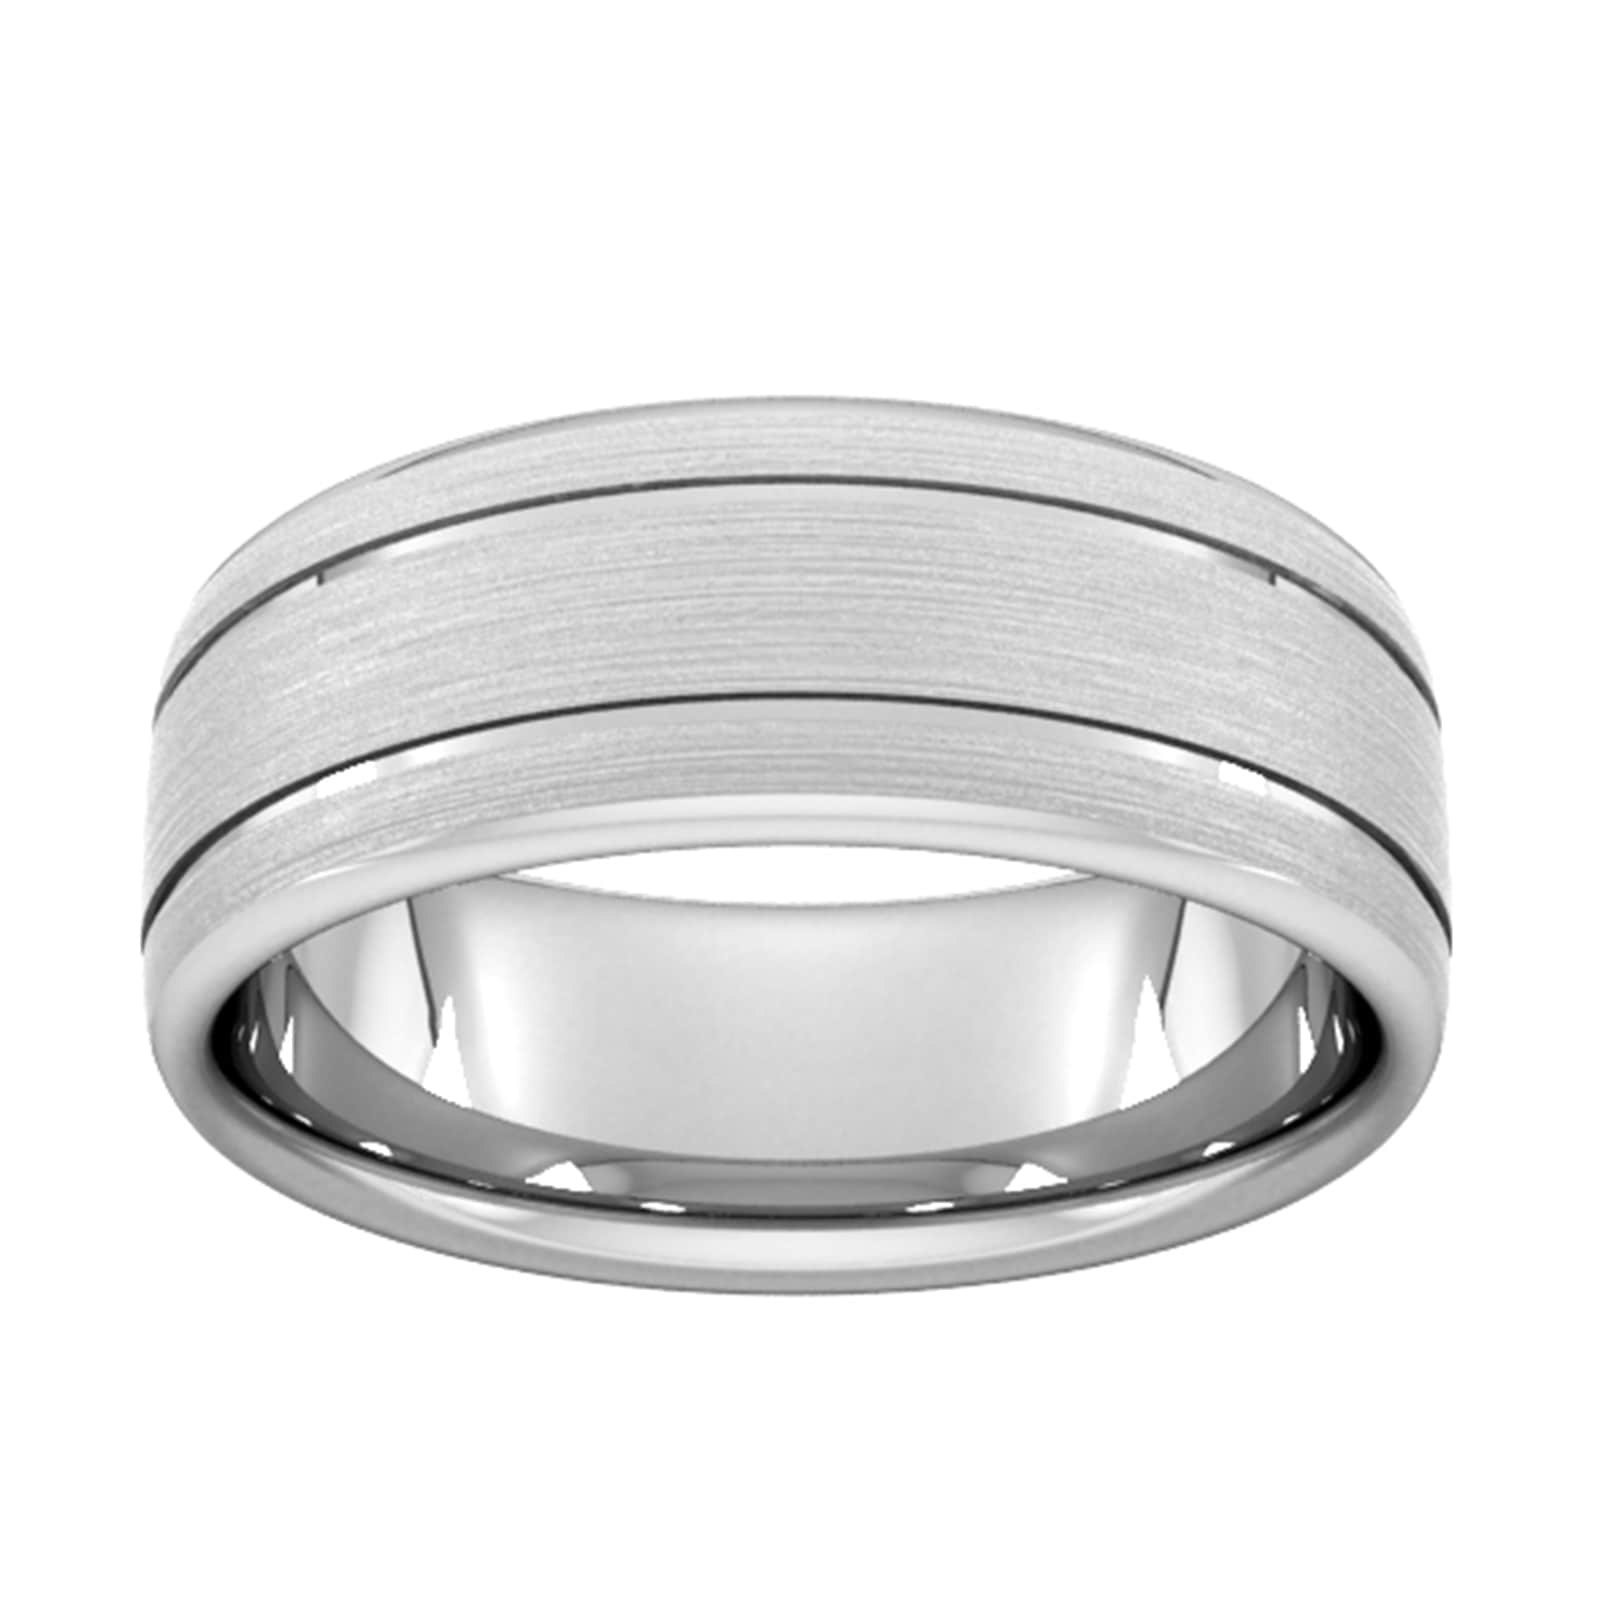 8mm Slight Court Heavy Matt Finish With Double Grooves Wedding Ring In 9 Carat White Gold - Ring Size G